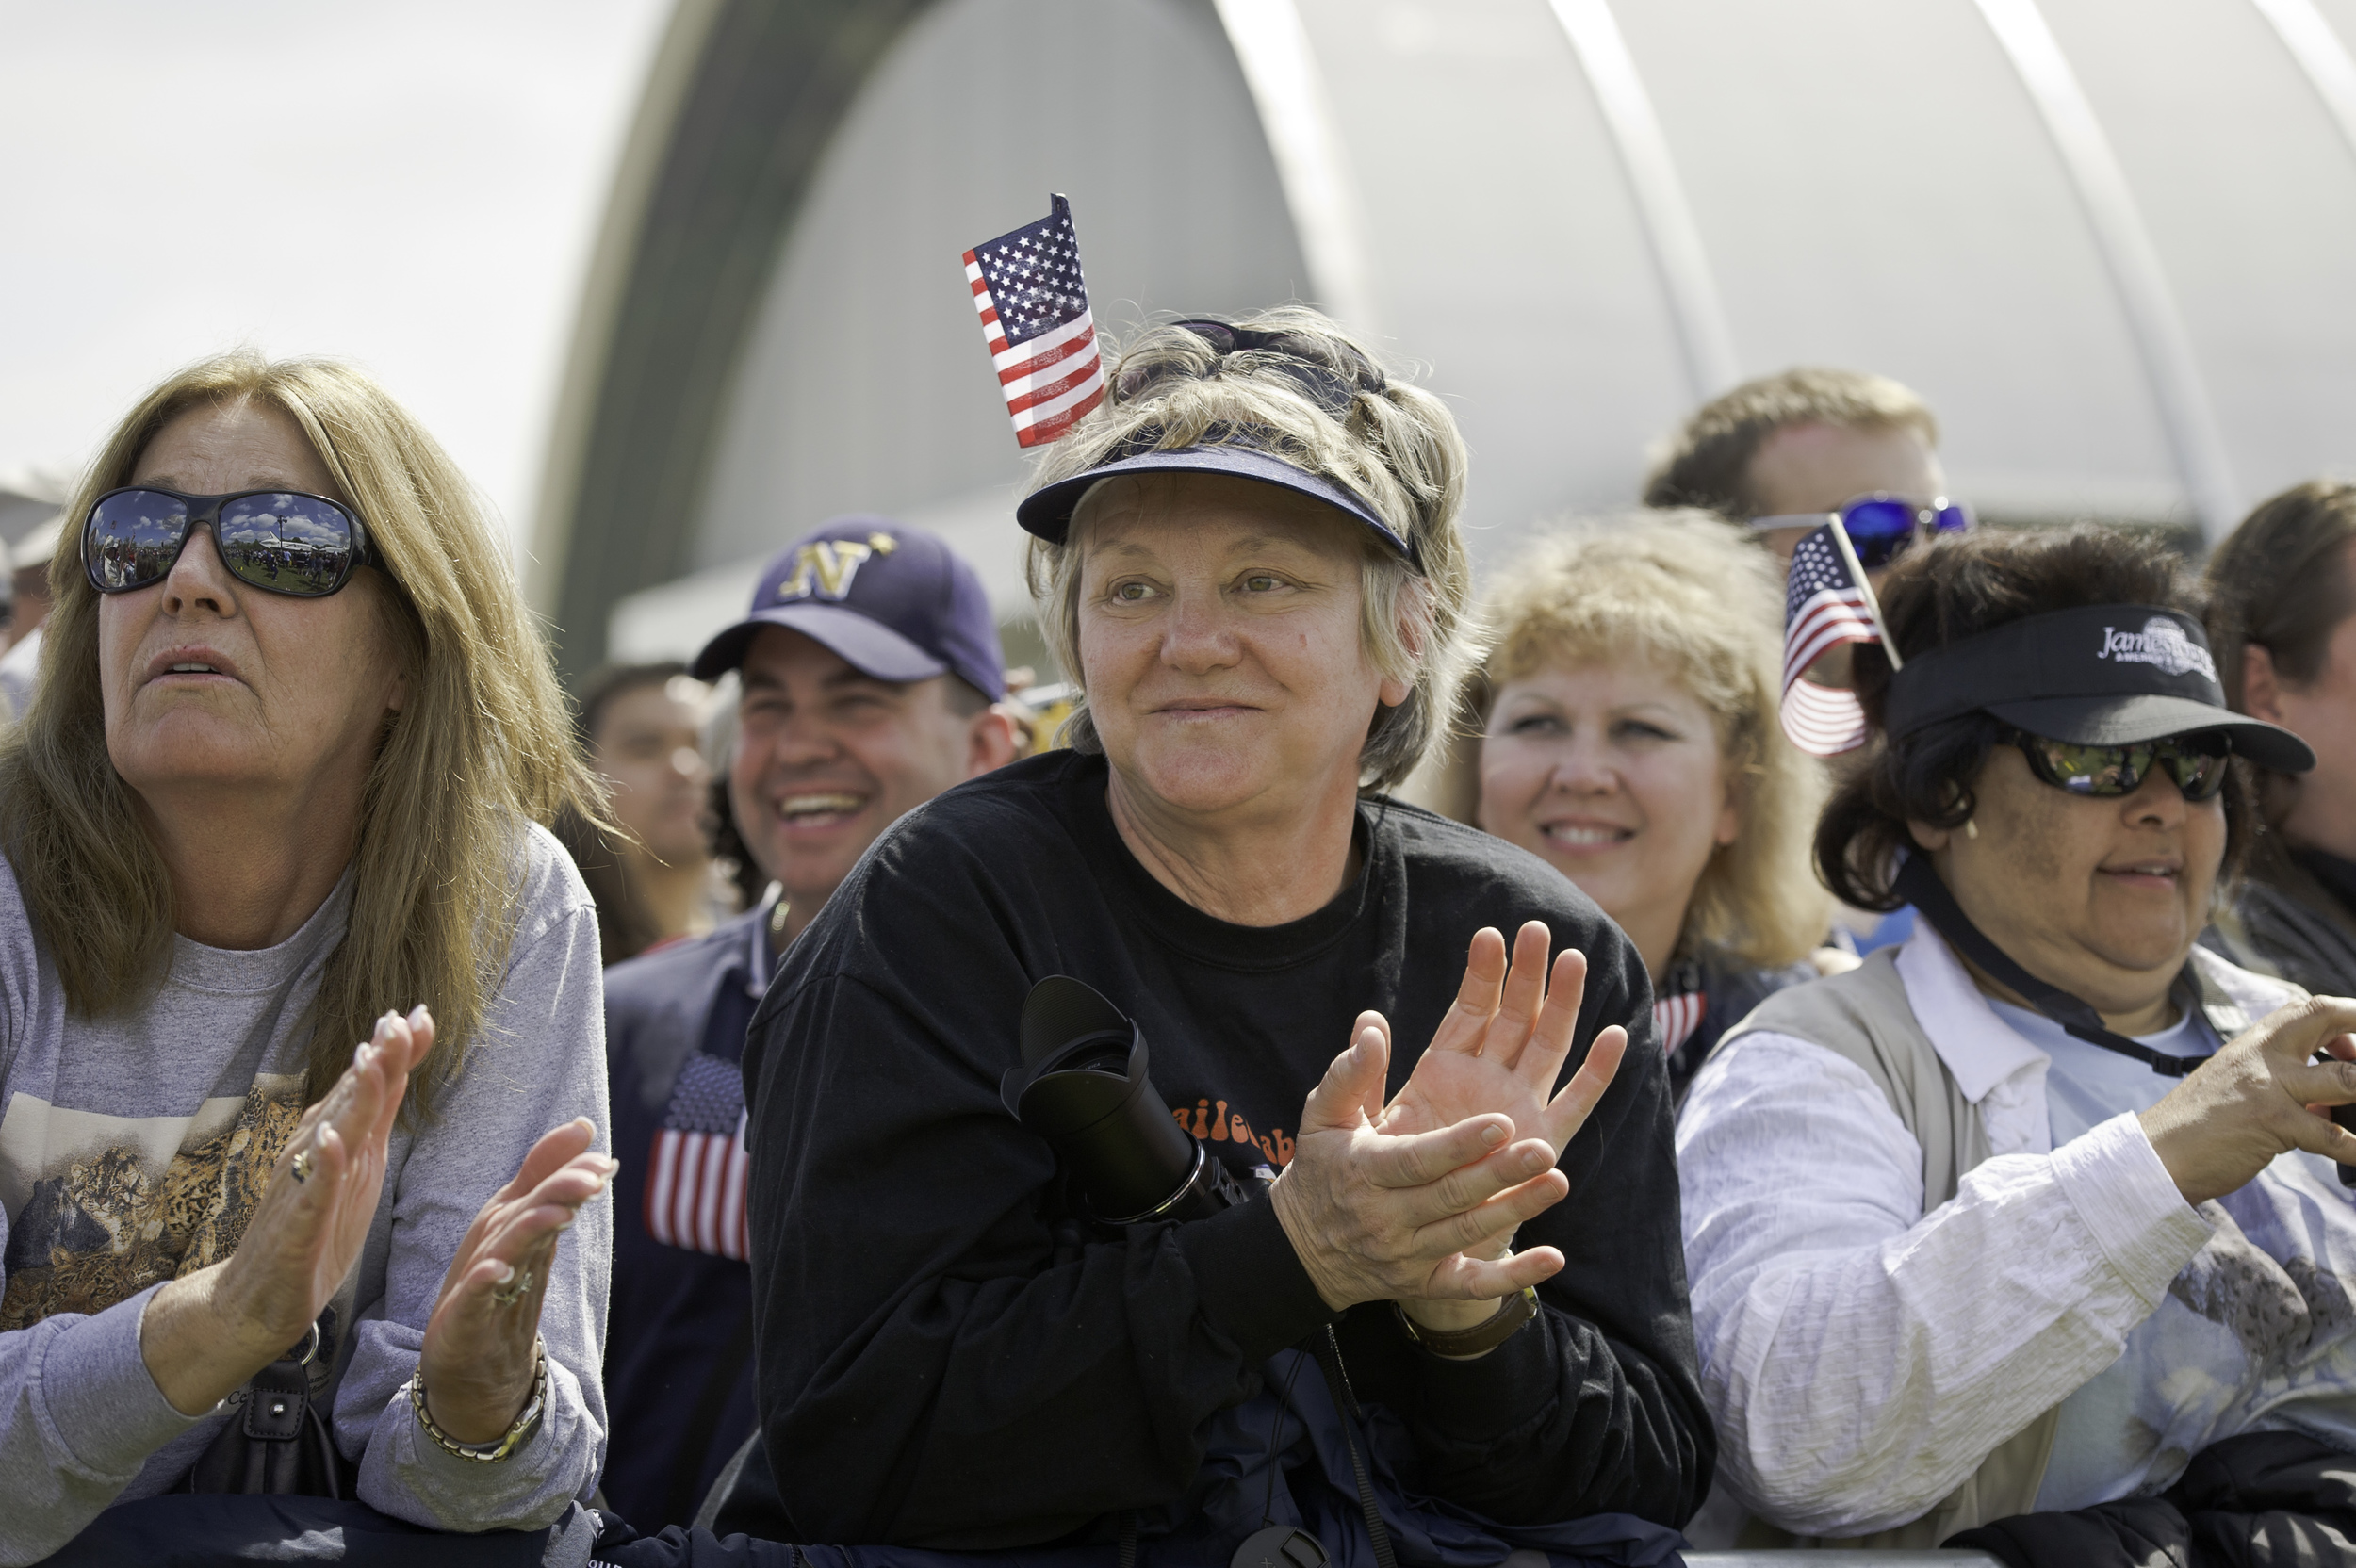  Bettye Kozlowski, center, and Francesca Wright, right, from Santa Clarita, CA attend the transfer ceremony for space shuttle Discovery, Thursday, April 19, 2012, at the Smithsonian's Steven F. Udvar-Hazy Center in Chantilly, Va. Discovery, the first